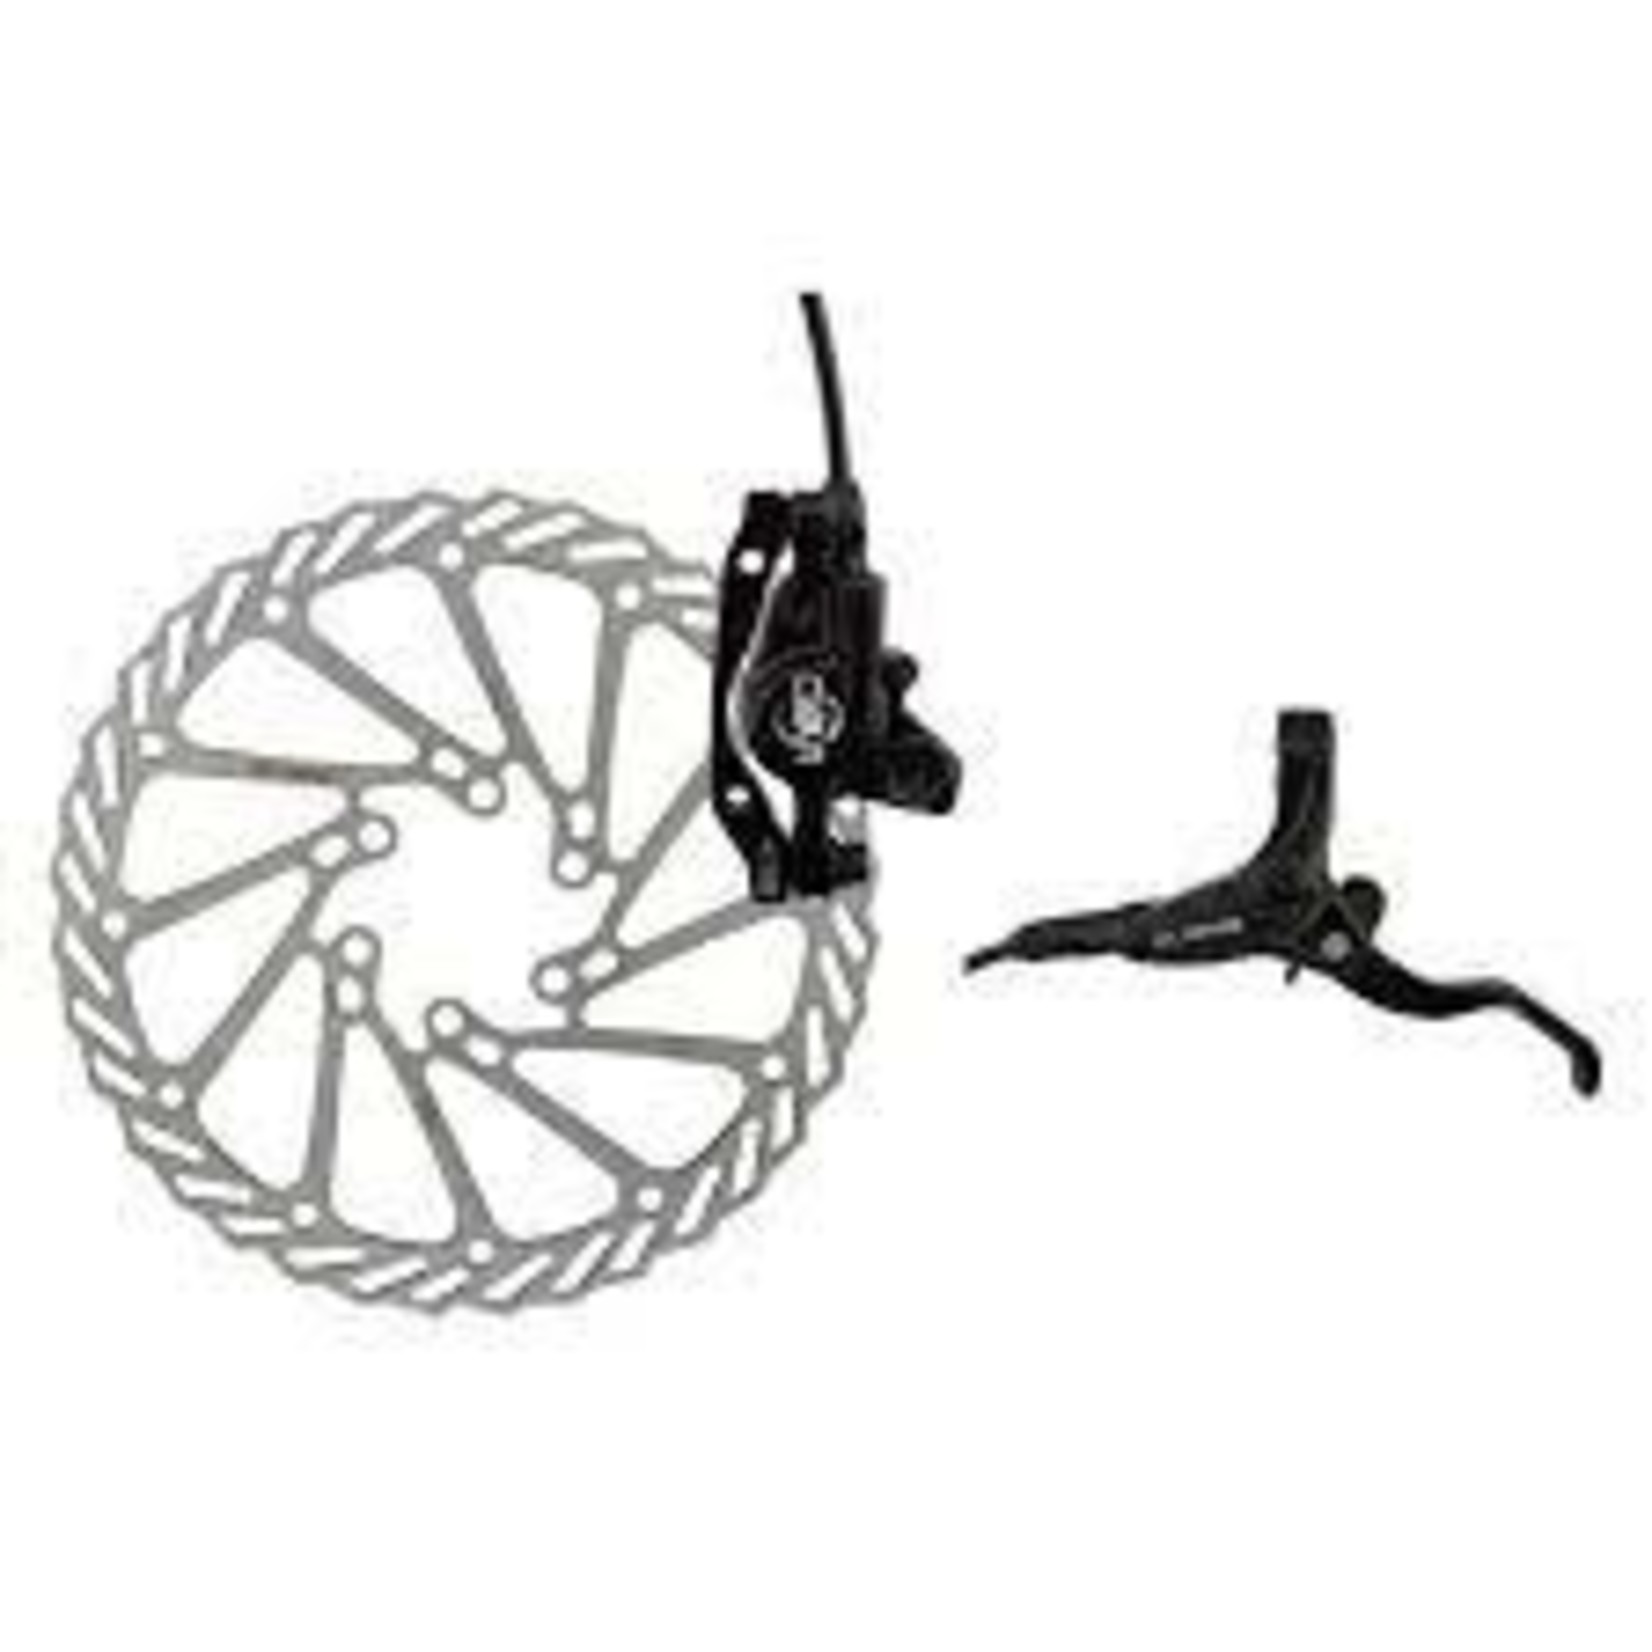 CLARKS Brake Disc Clark Clout 1 Hydro w/Lever Front